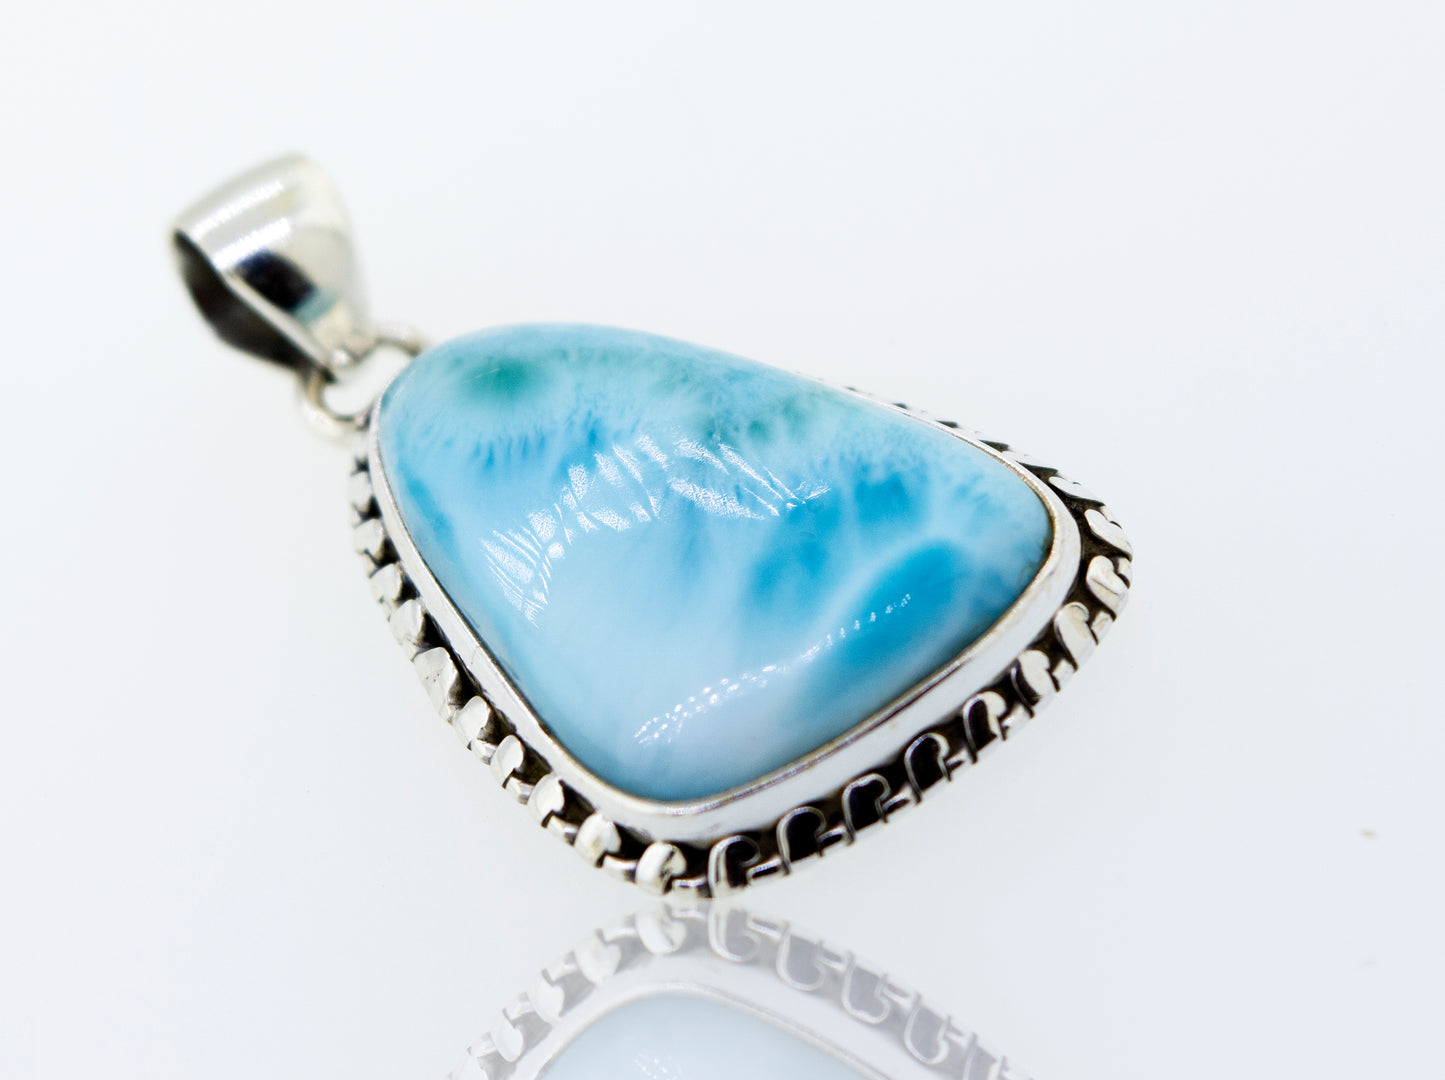 A stunning Super Silver Medium Larimar Pendant with Ball Border, measuring 1.5 inches in length.